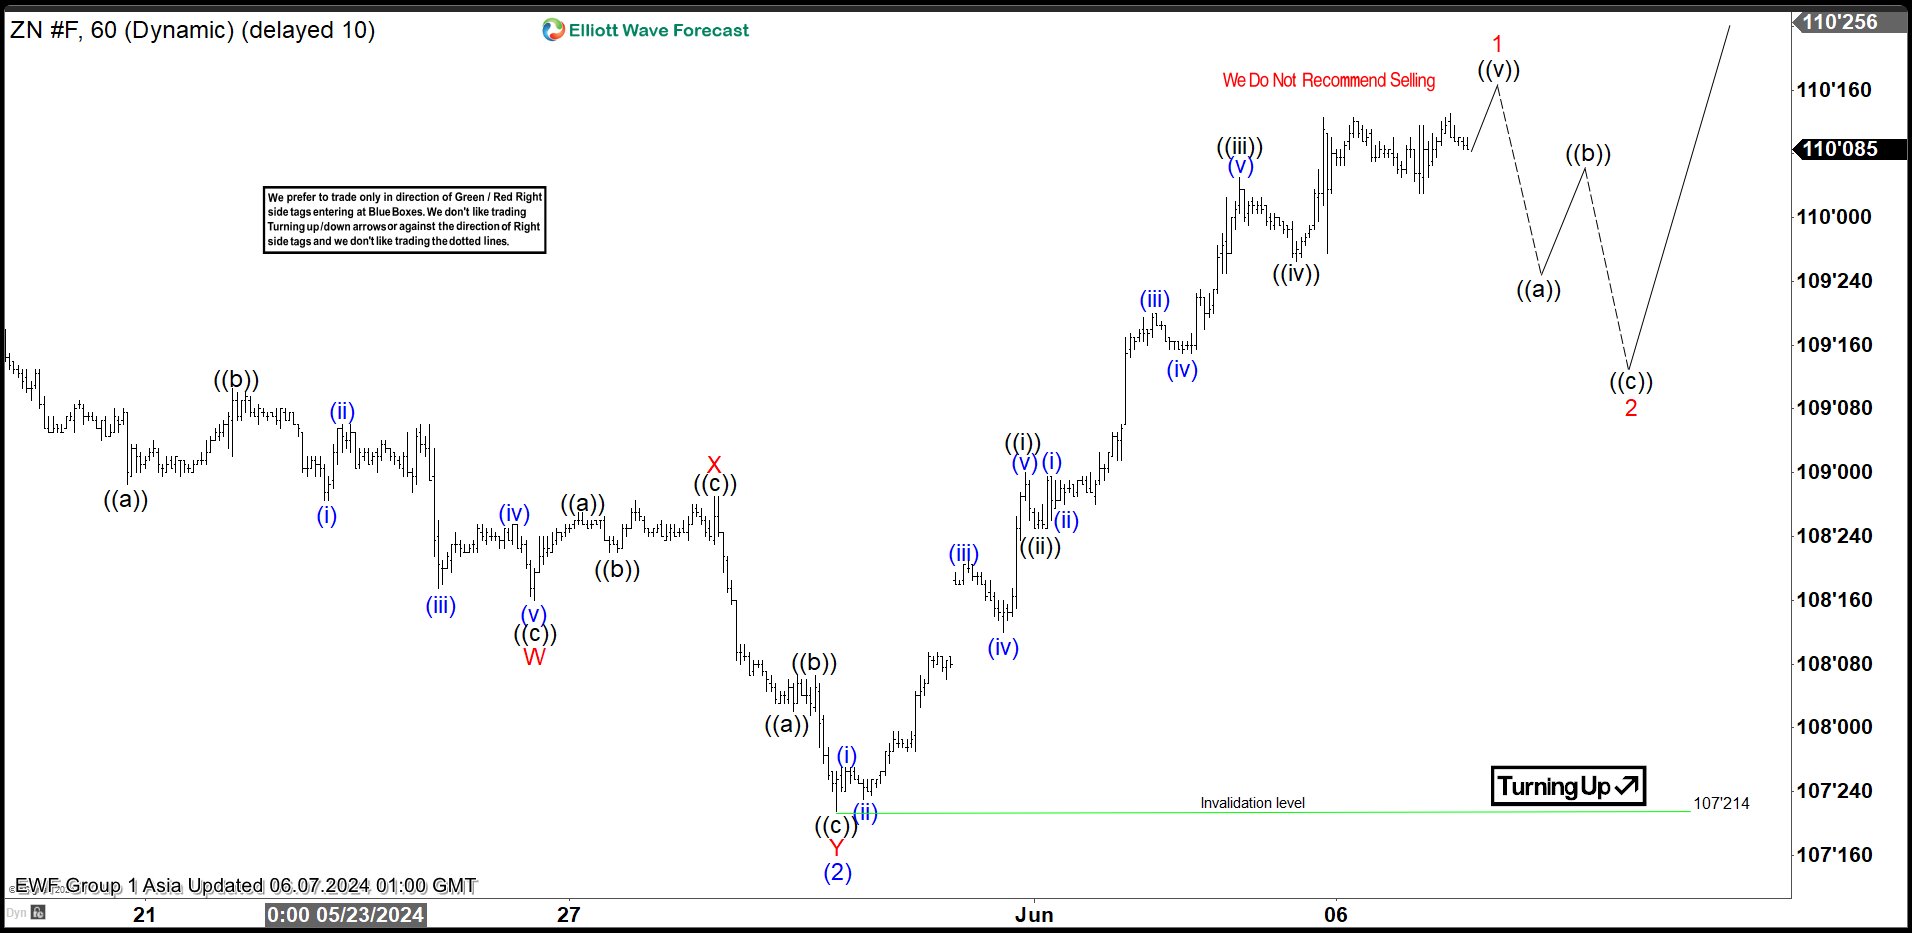 Elliott Wave Intraday View on Ten Year Notes (ZN_F) Looking for Pullback Soon